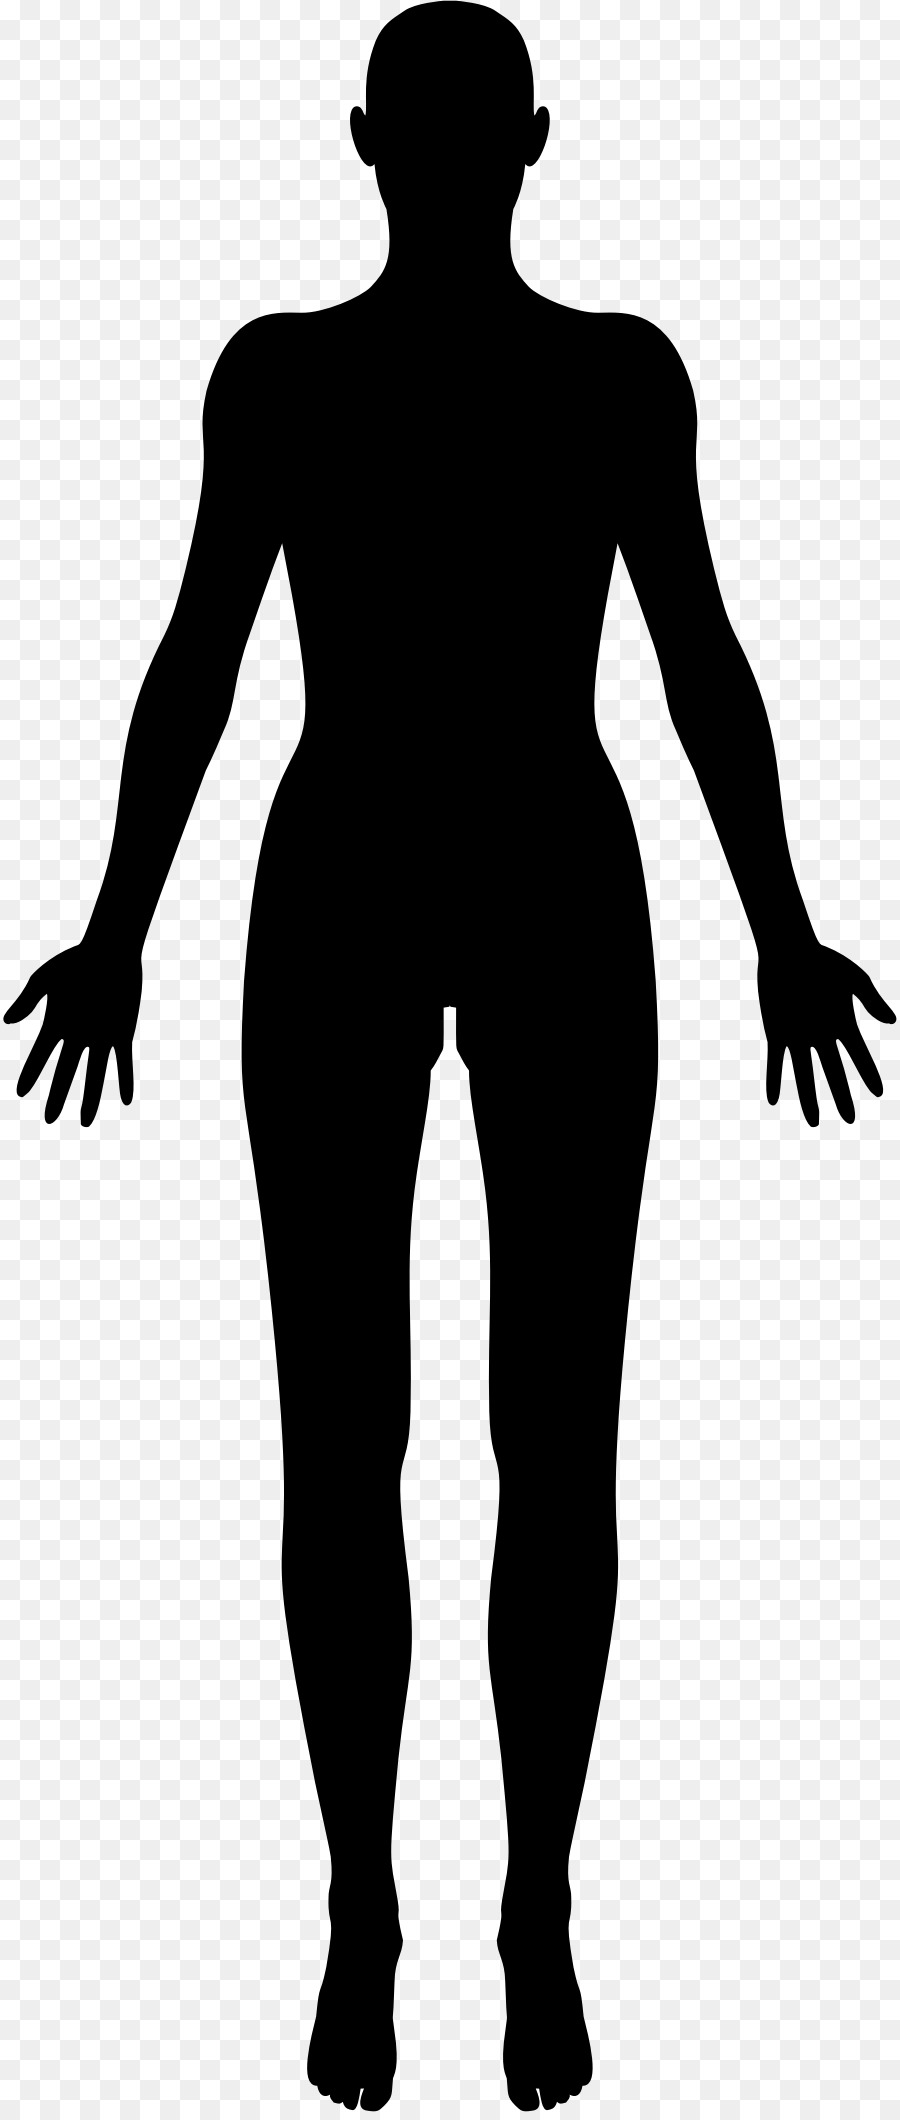 Female body shape Human body Silhouette Clip art - female png download - 894*2112 - Free Transparent  png Download.